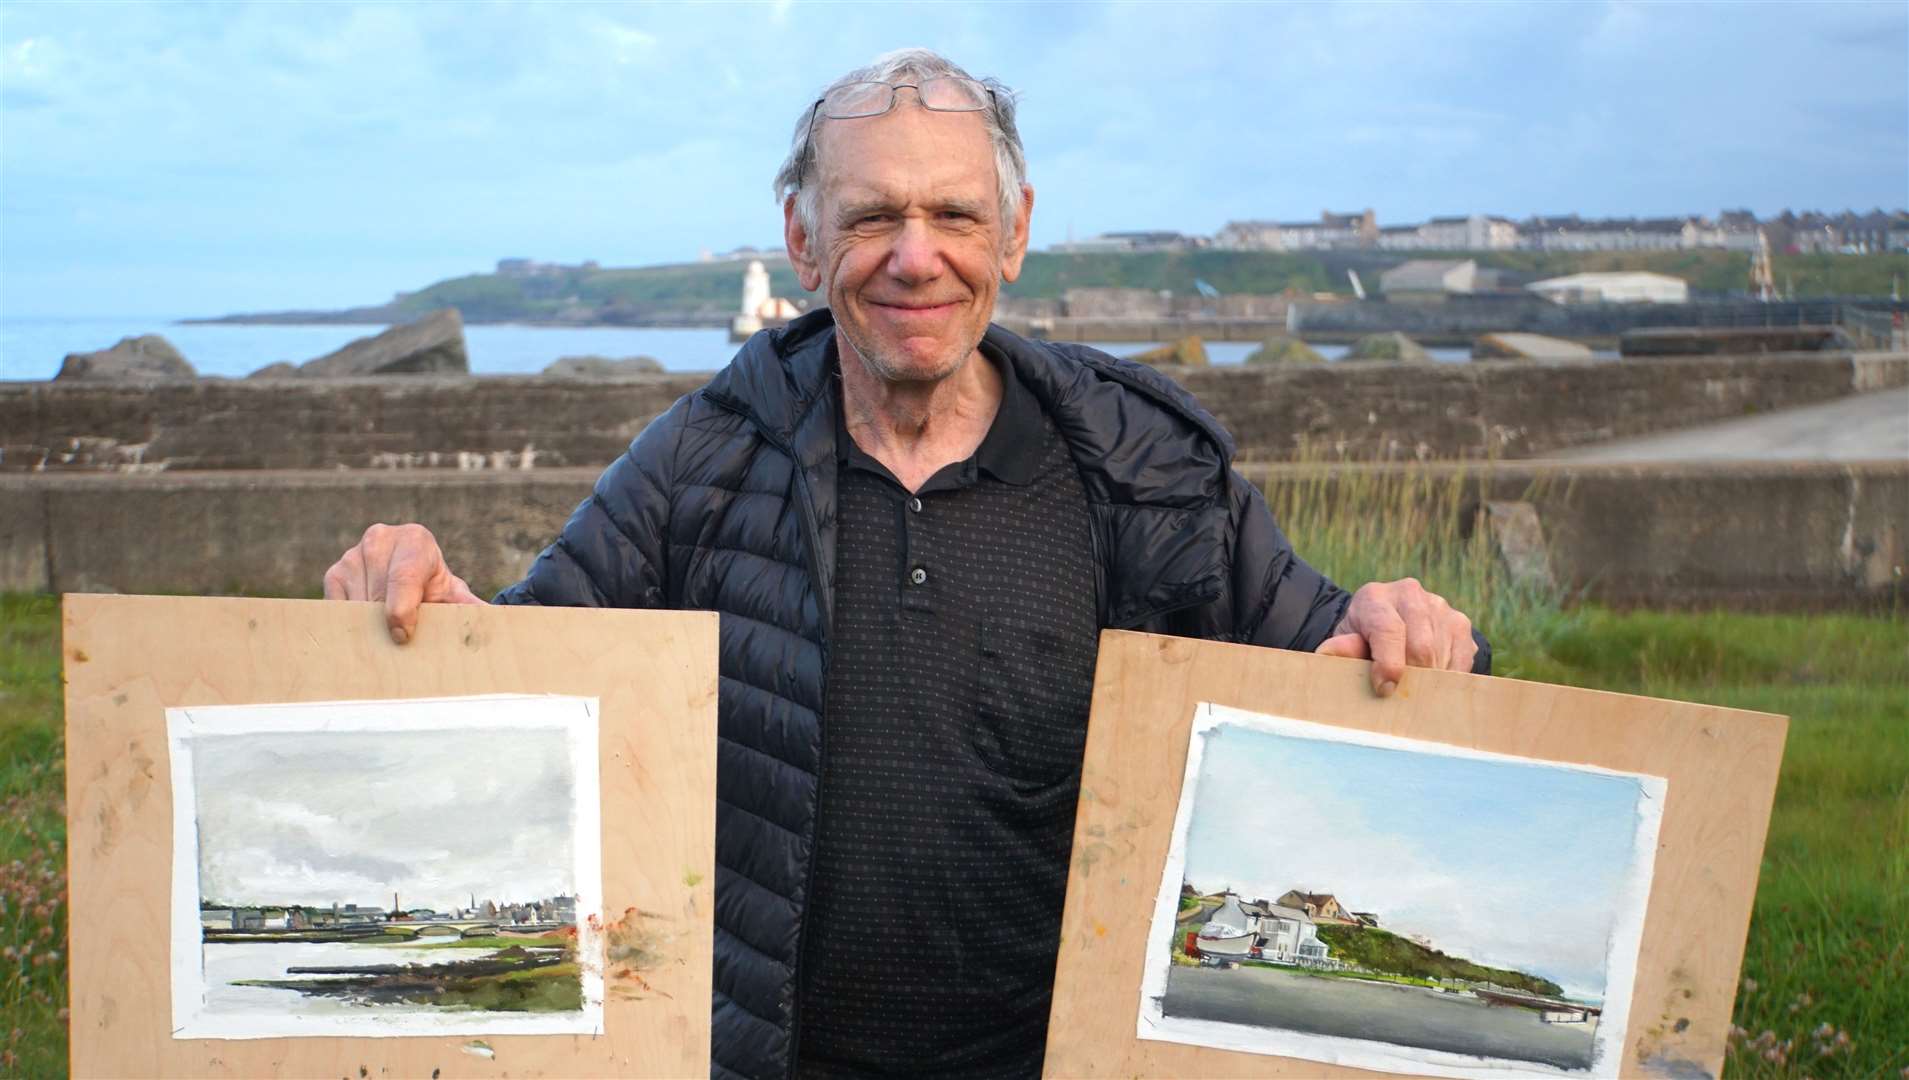 The artist did some painting based on scenes in and around Wick during his stay. Pictures: DGS